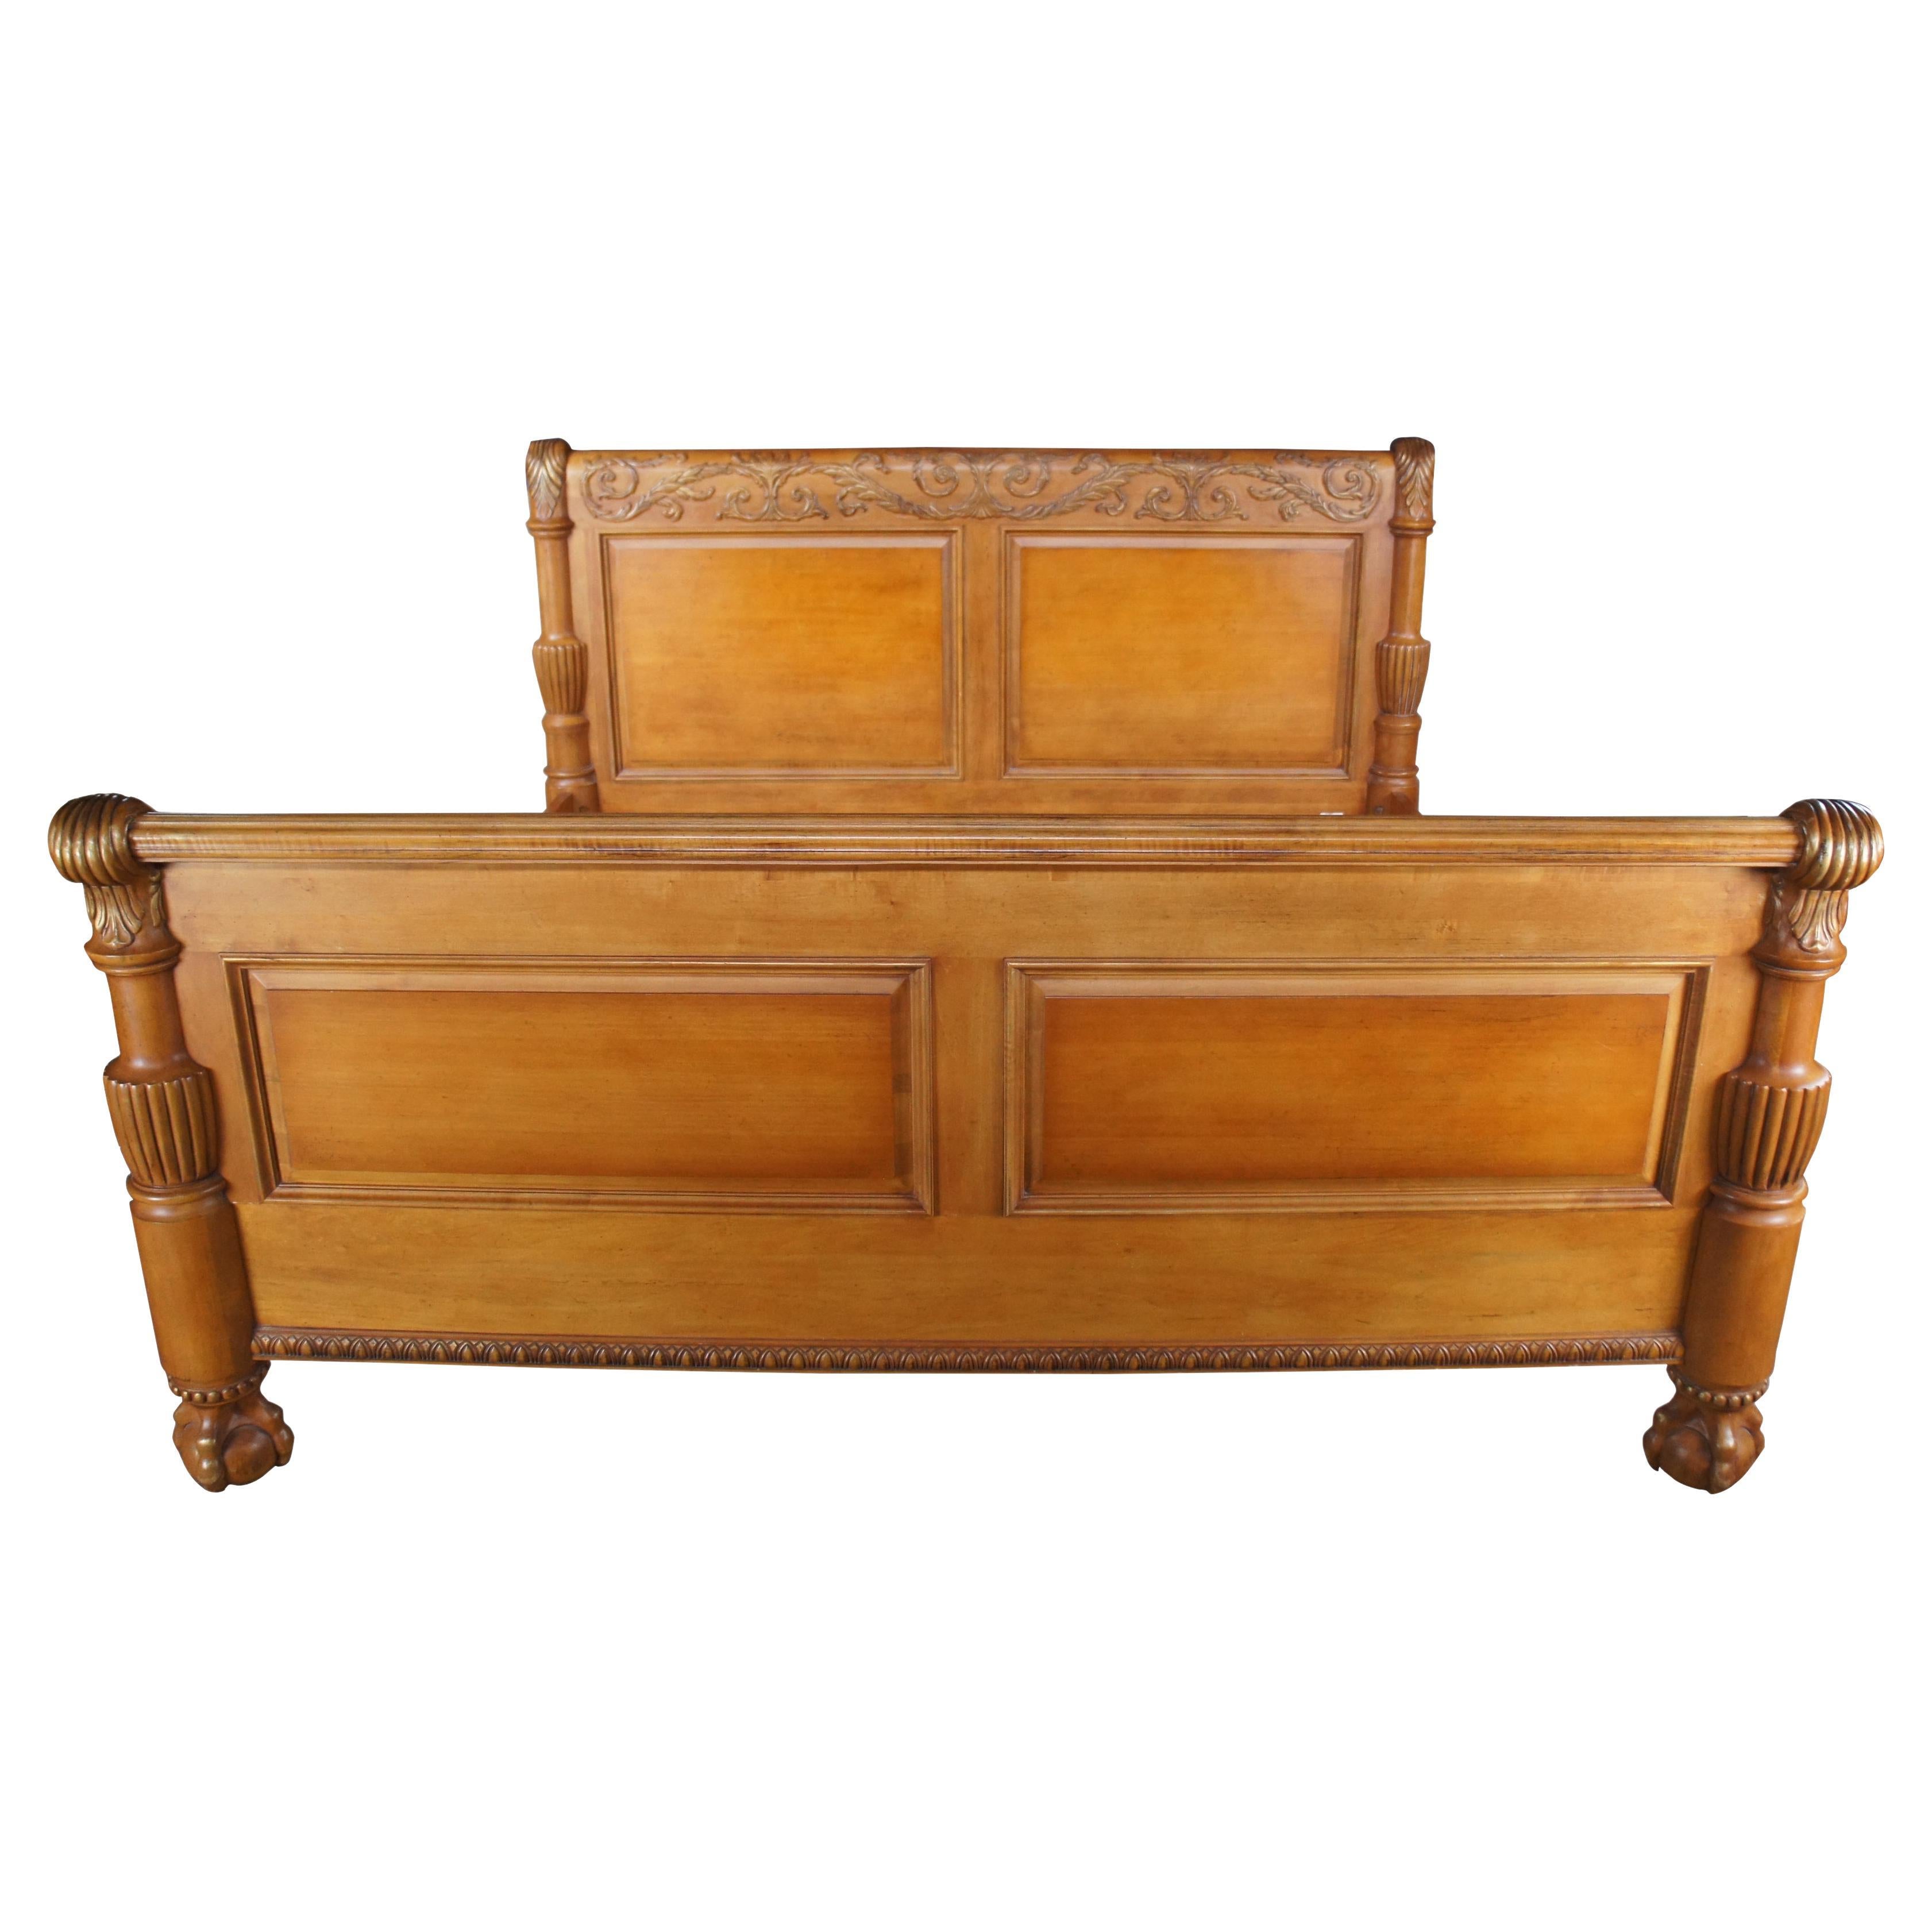 Century Furniture English Chippendale style sleigh bed, circa last quarter 20th century.  Made from mahogany with carved and paneled head and foot boards.  The posts feature a lovely scrolled acanthus motif over reeded baluster design leading to